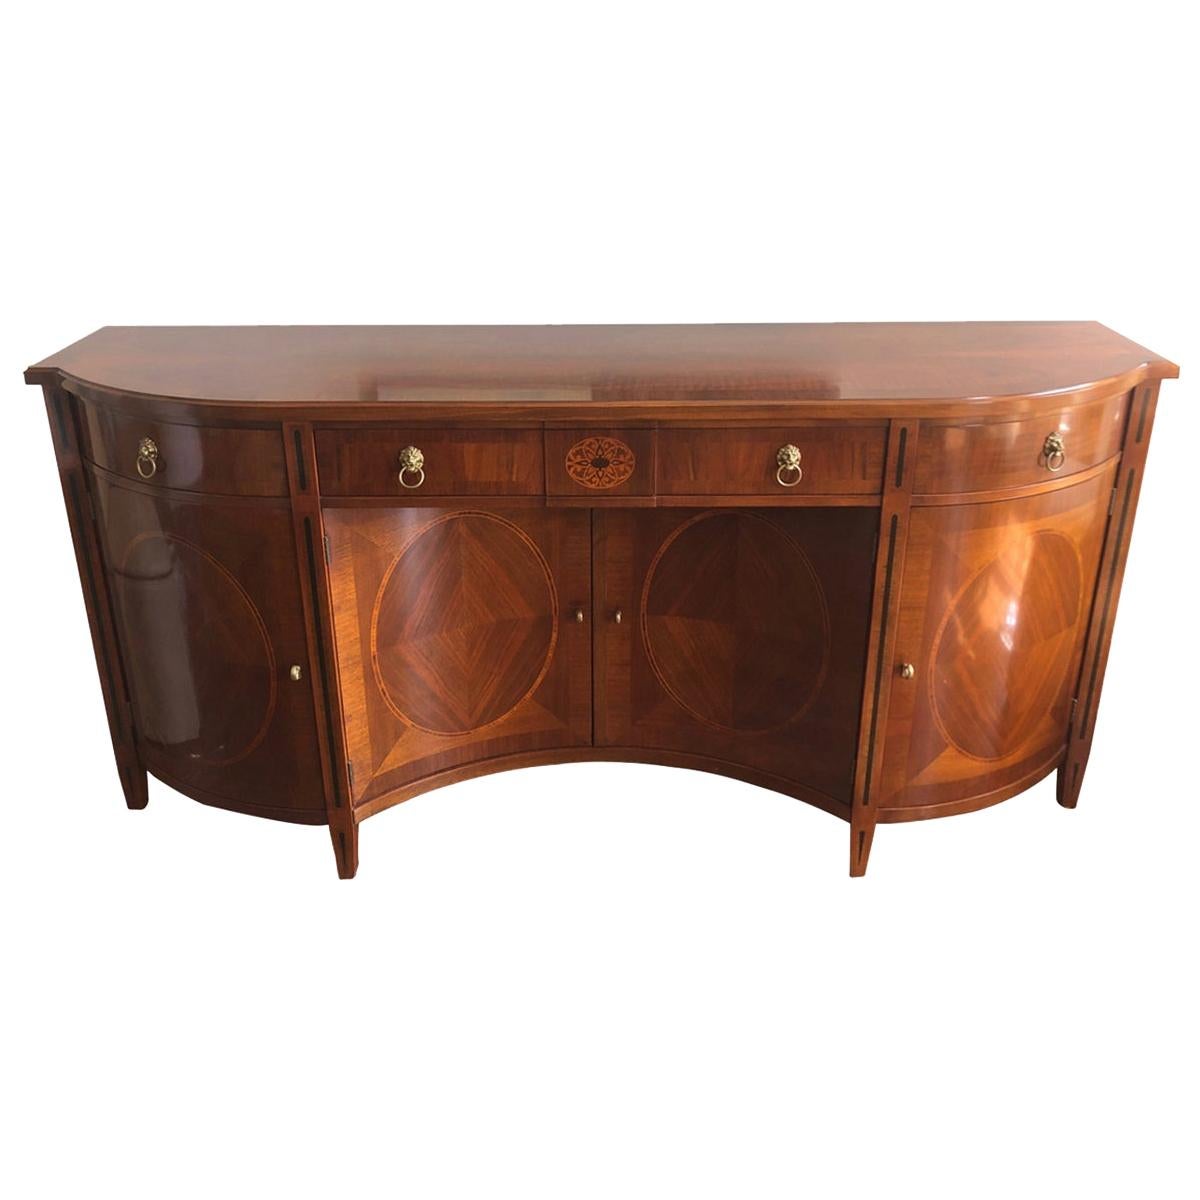 Resplendent Large Russian Neoclassical Serpentine Sideboard